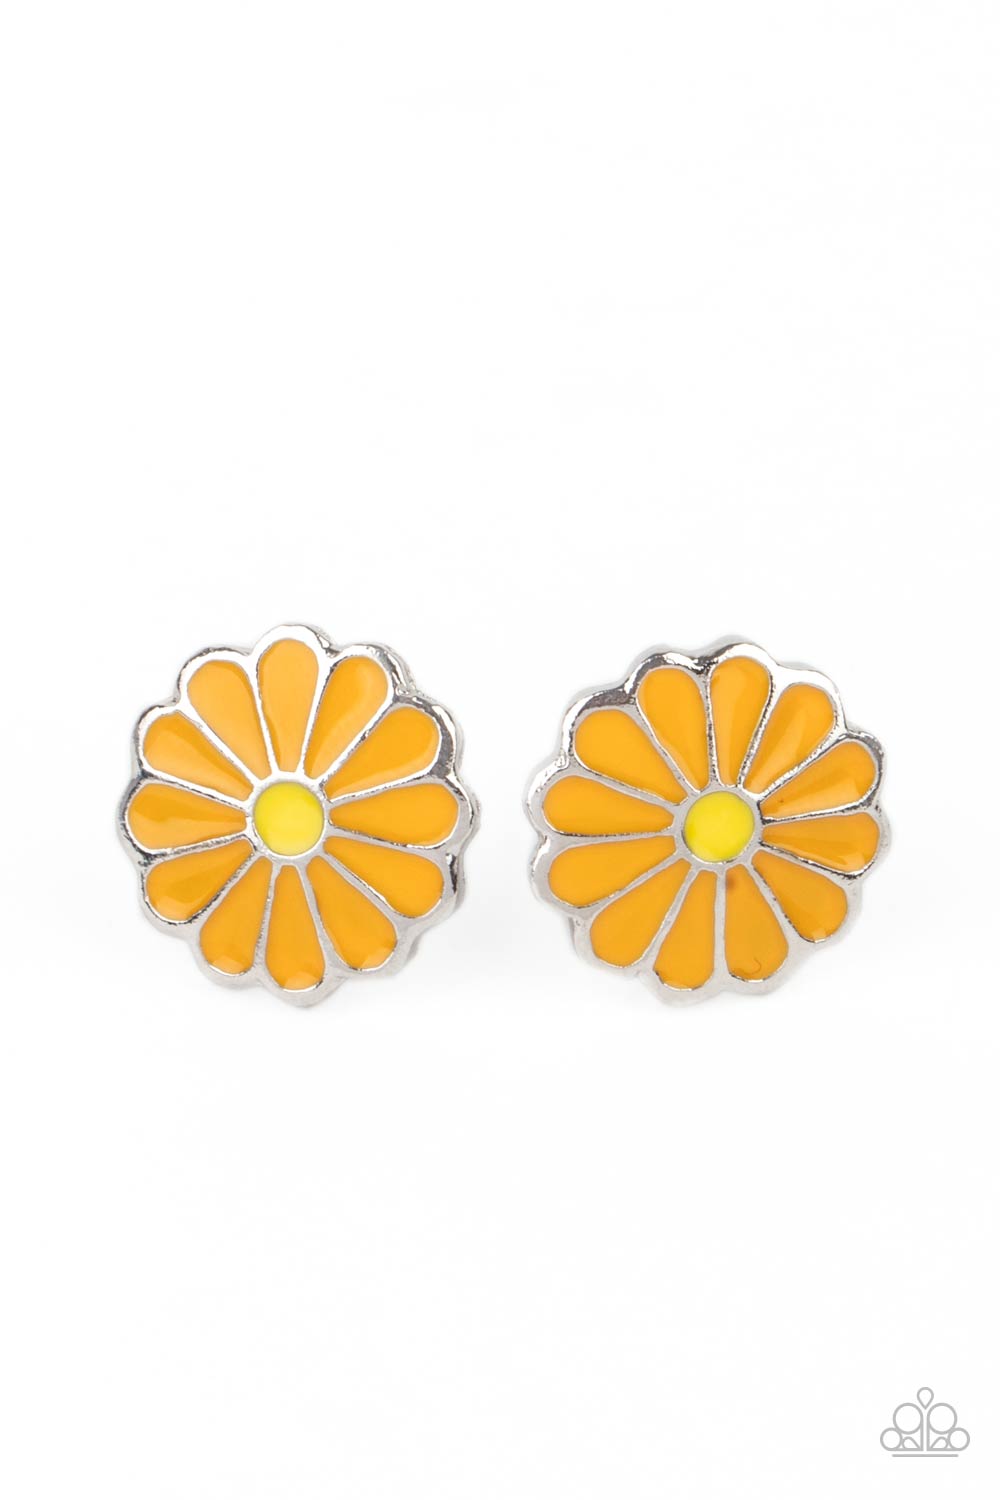 paparazzi-accessories-budding-out-orange-post earrings